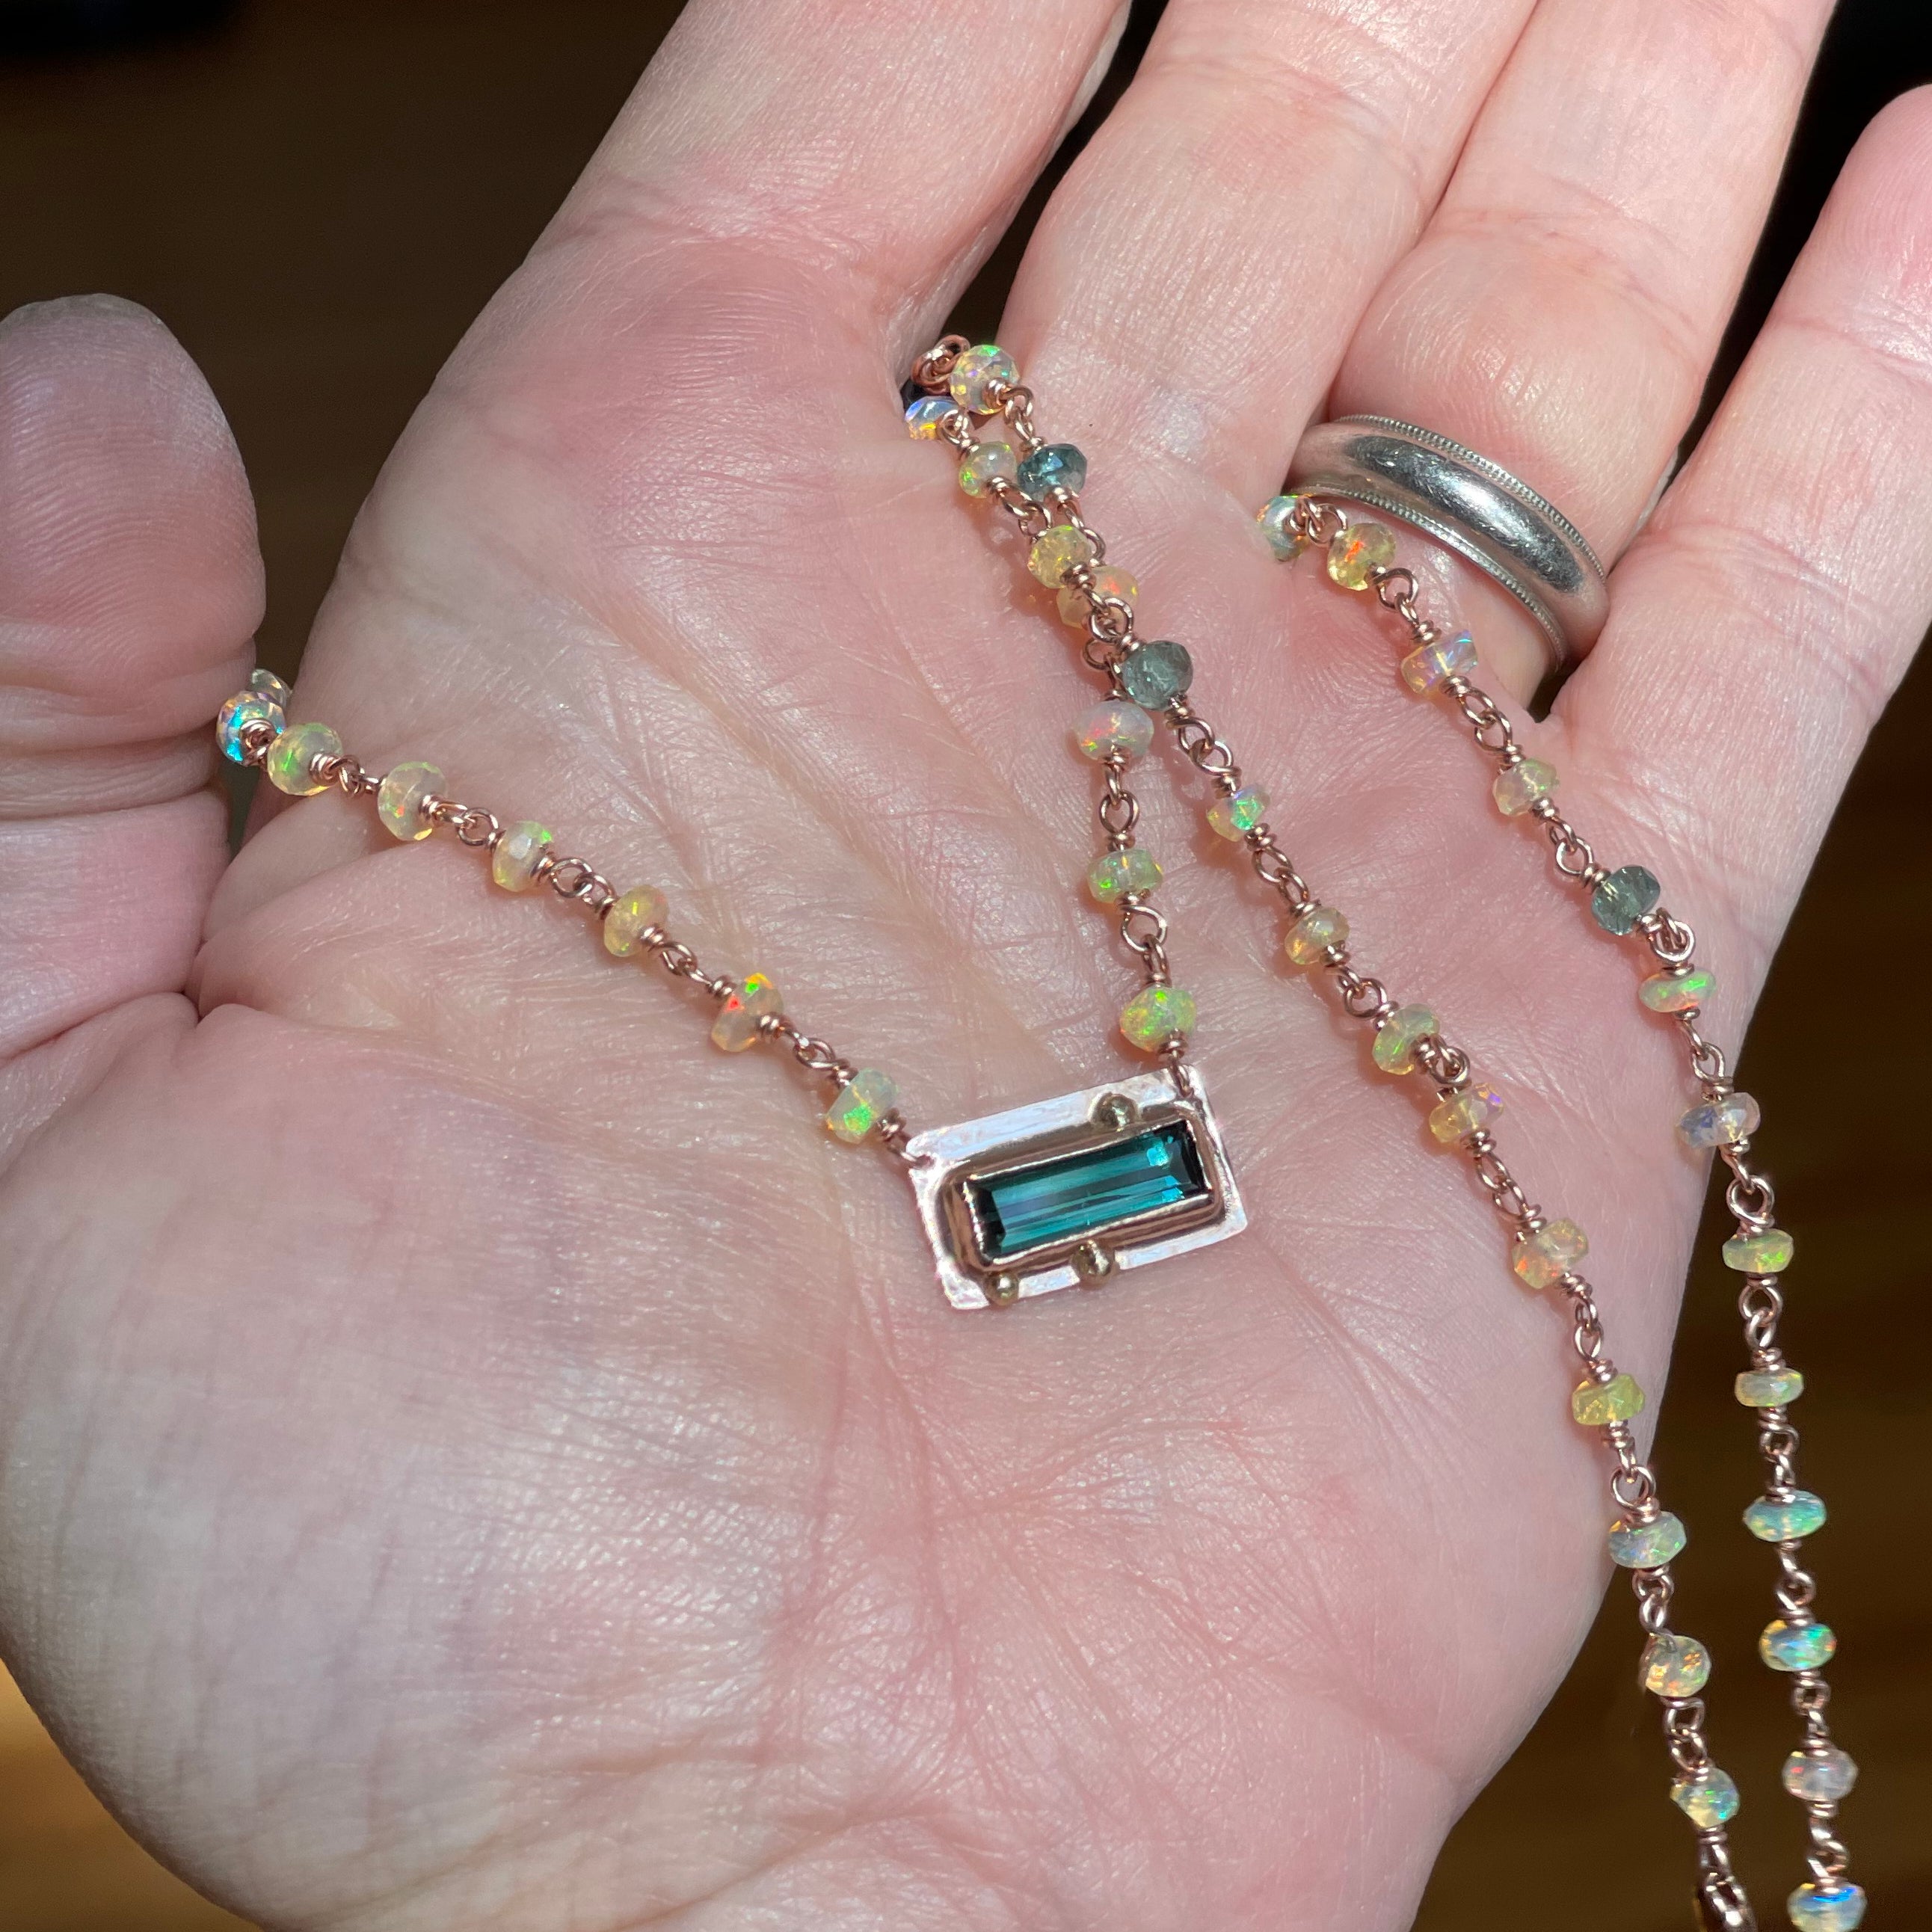 14K Blue Tourmaline and Opal Necklace, Solid Rose Gold, One of a Kind